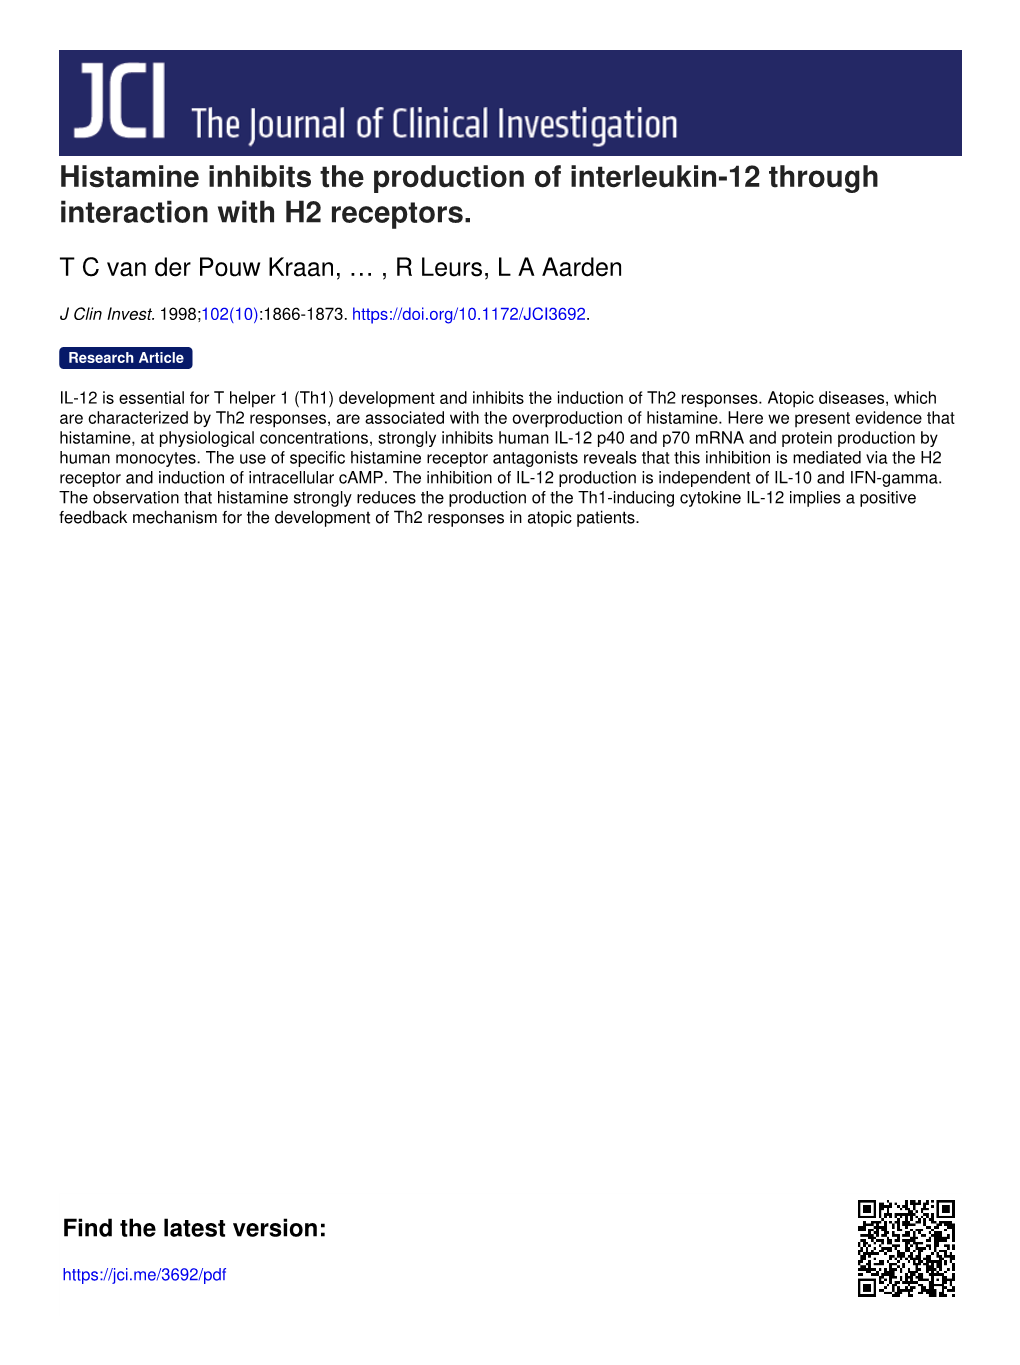 Histamine Inhibits the Production of Interleukin-12 Through Interaction with H2 Receptors